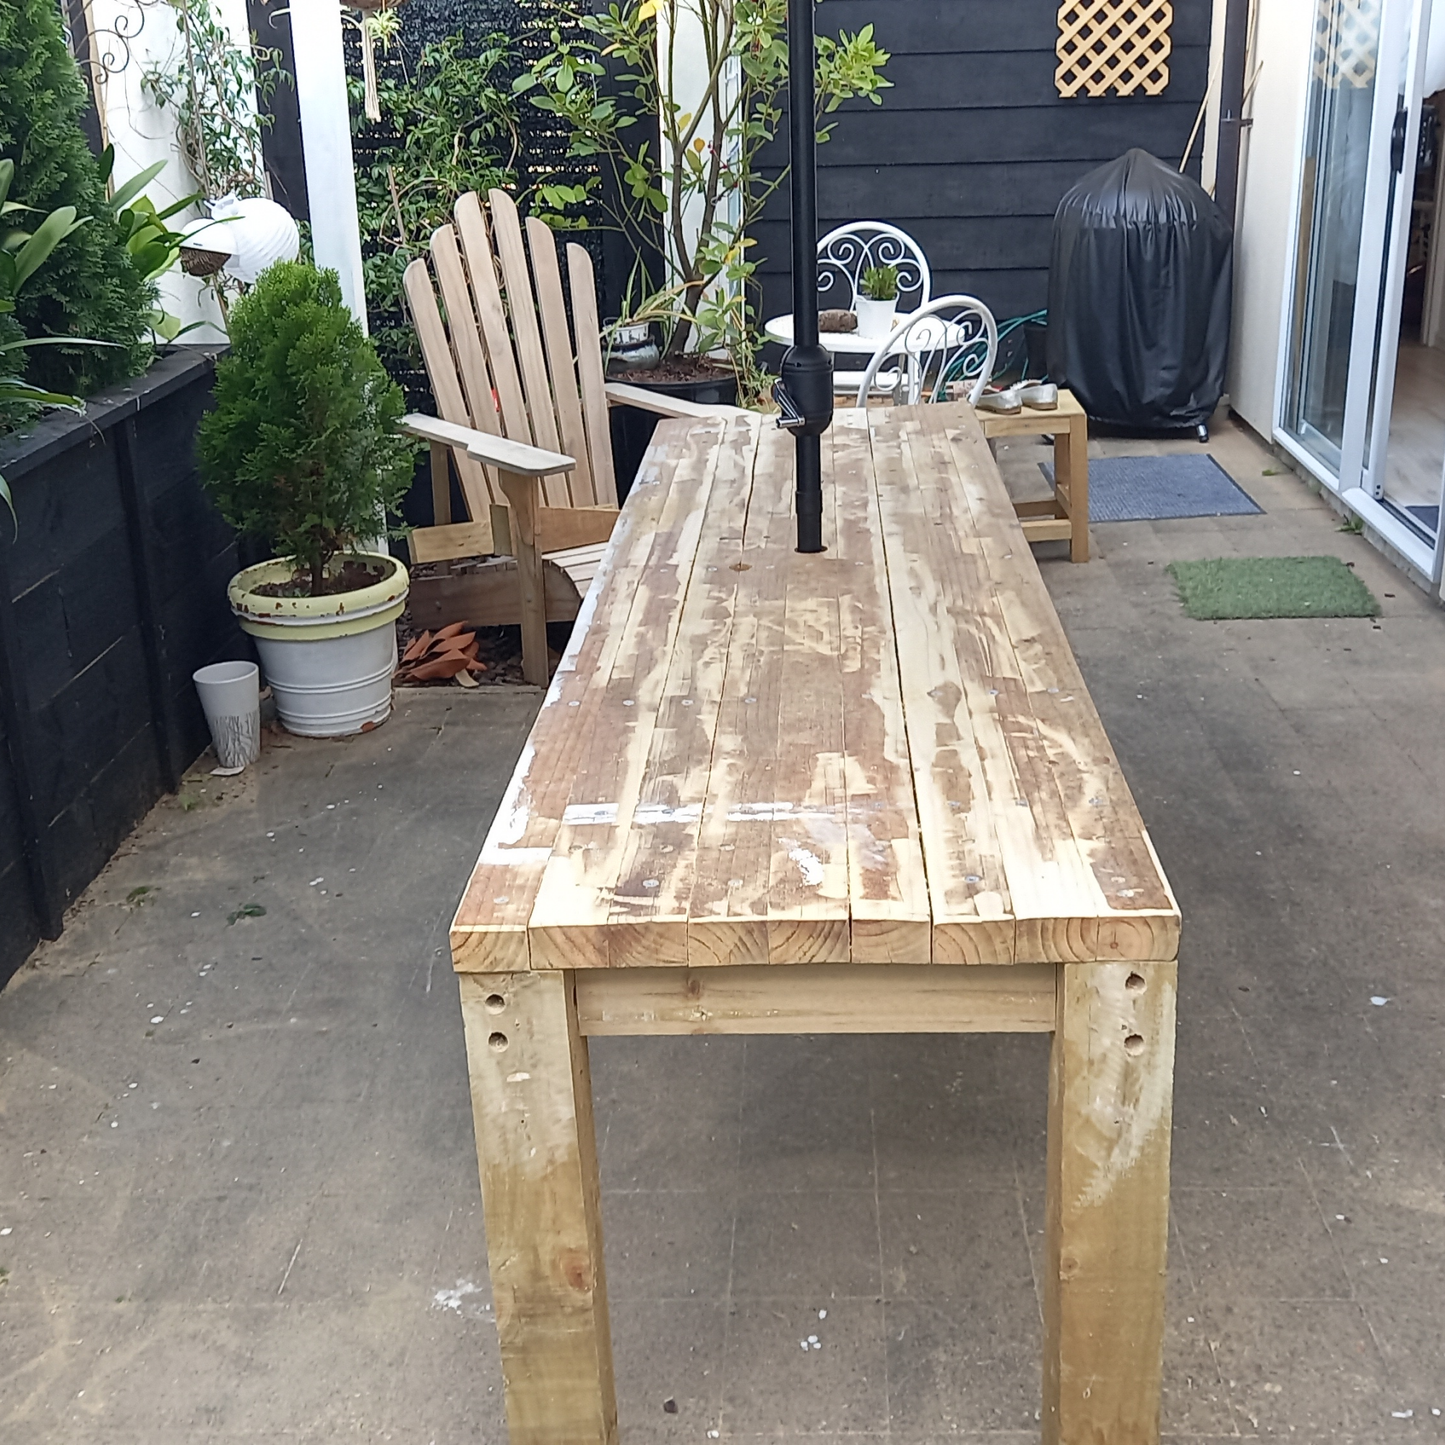 DIY plans to build a rustic 8ft (2.4m) long, narrow outdoor dining table that can seat 12 people